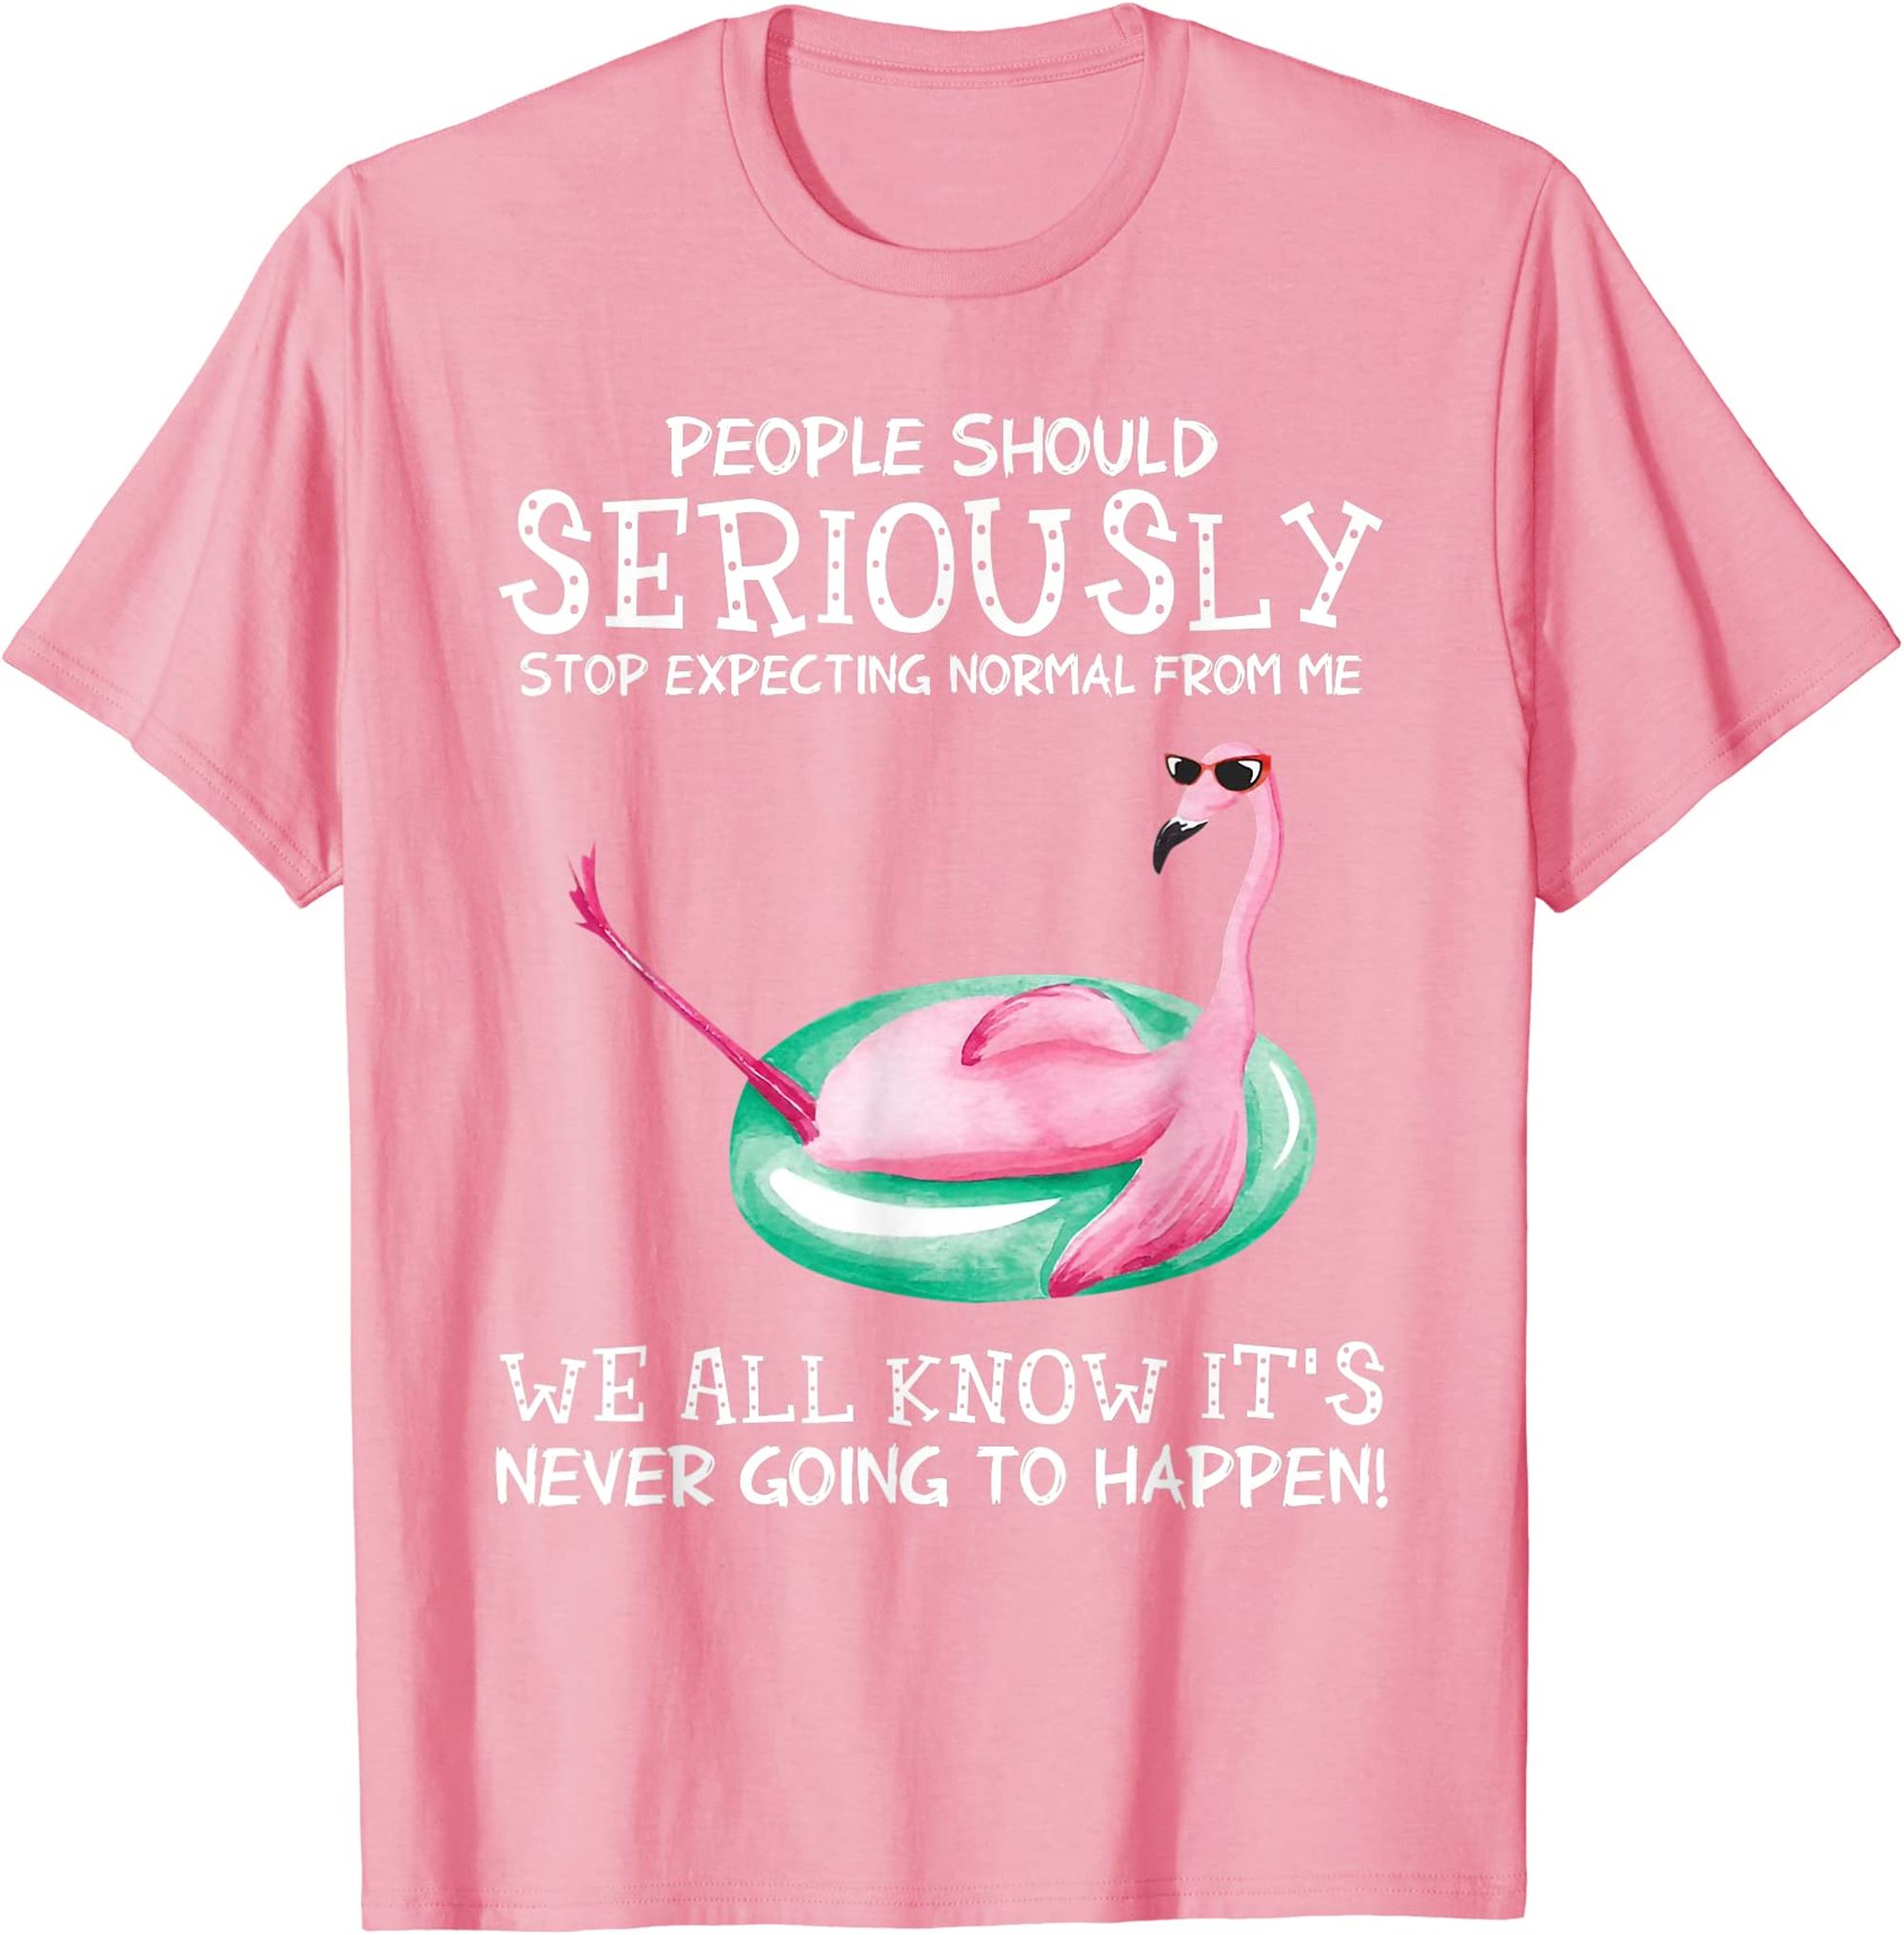 People Should Stop Expecting Normal From Me Funny Flamingo T-shirt Full Size Up To 5xl